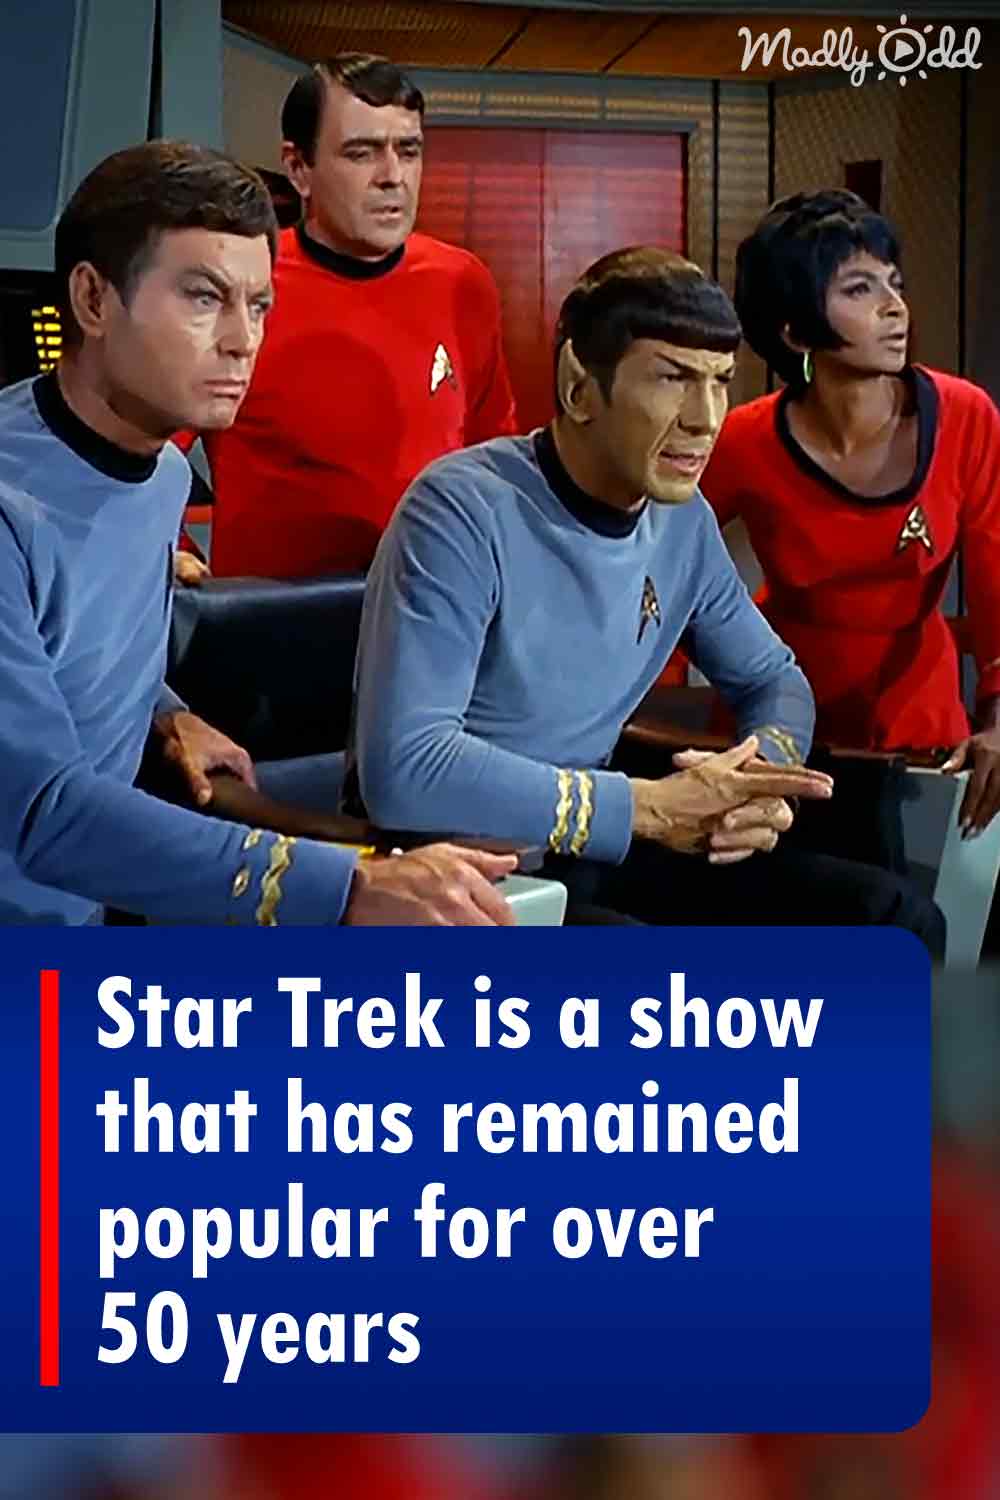 Star Trek is a show that has remained popular for over 50 years